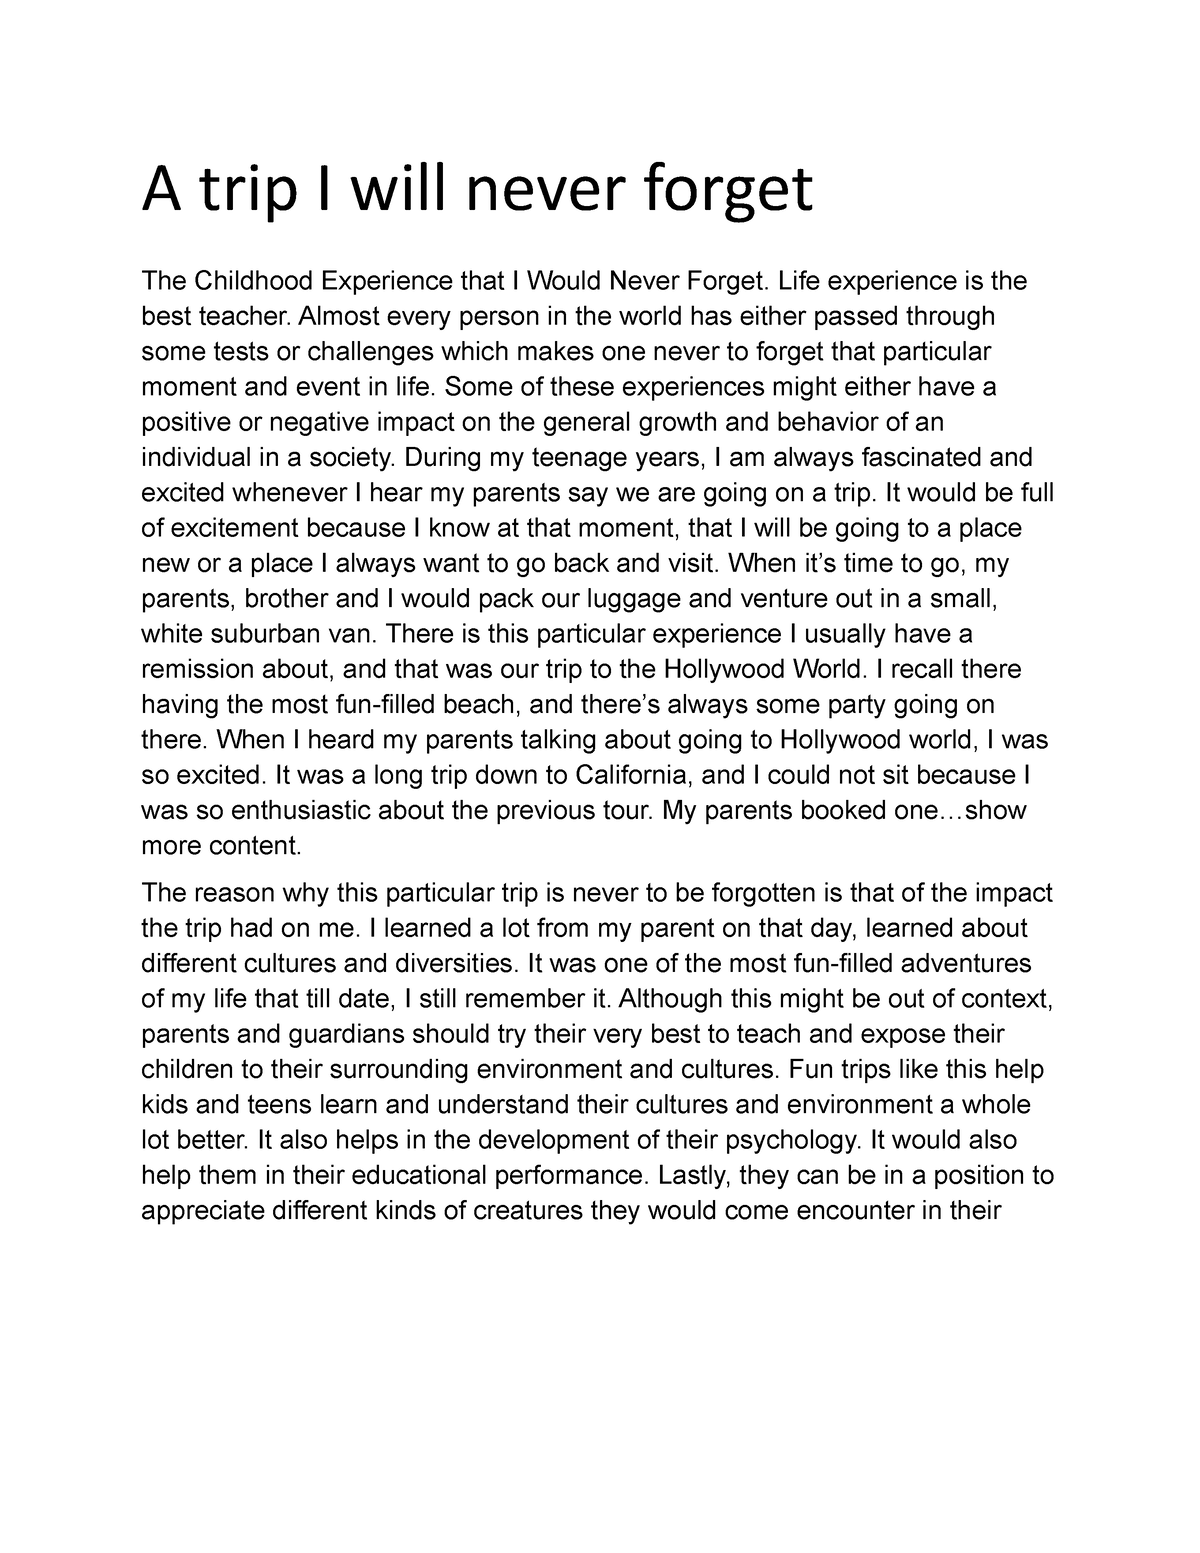 school essay a day i will never forget short essay